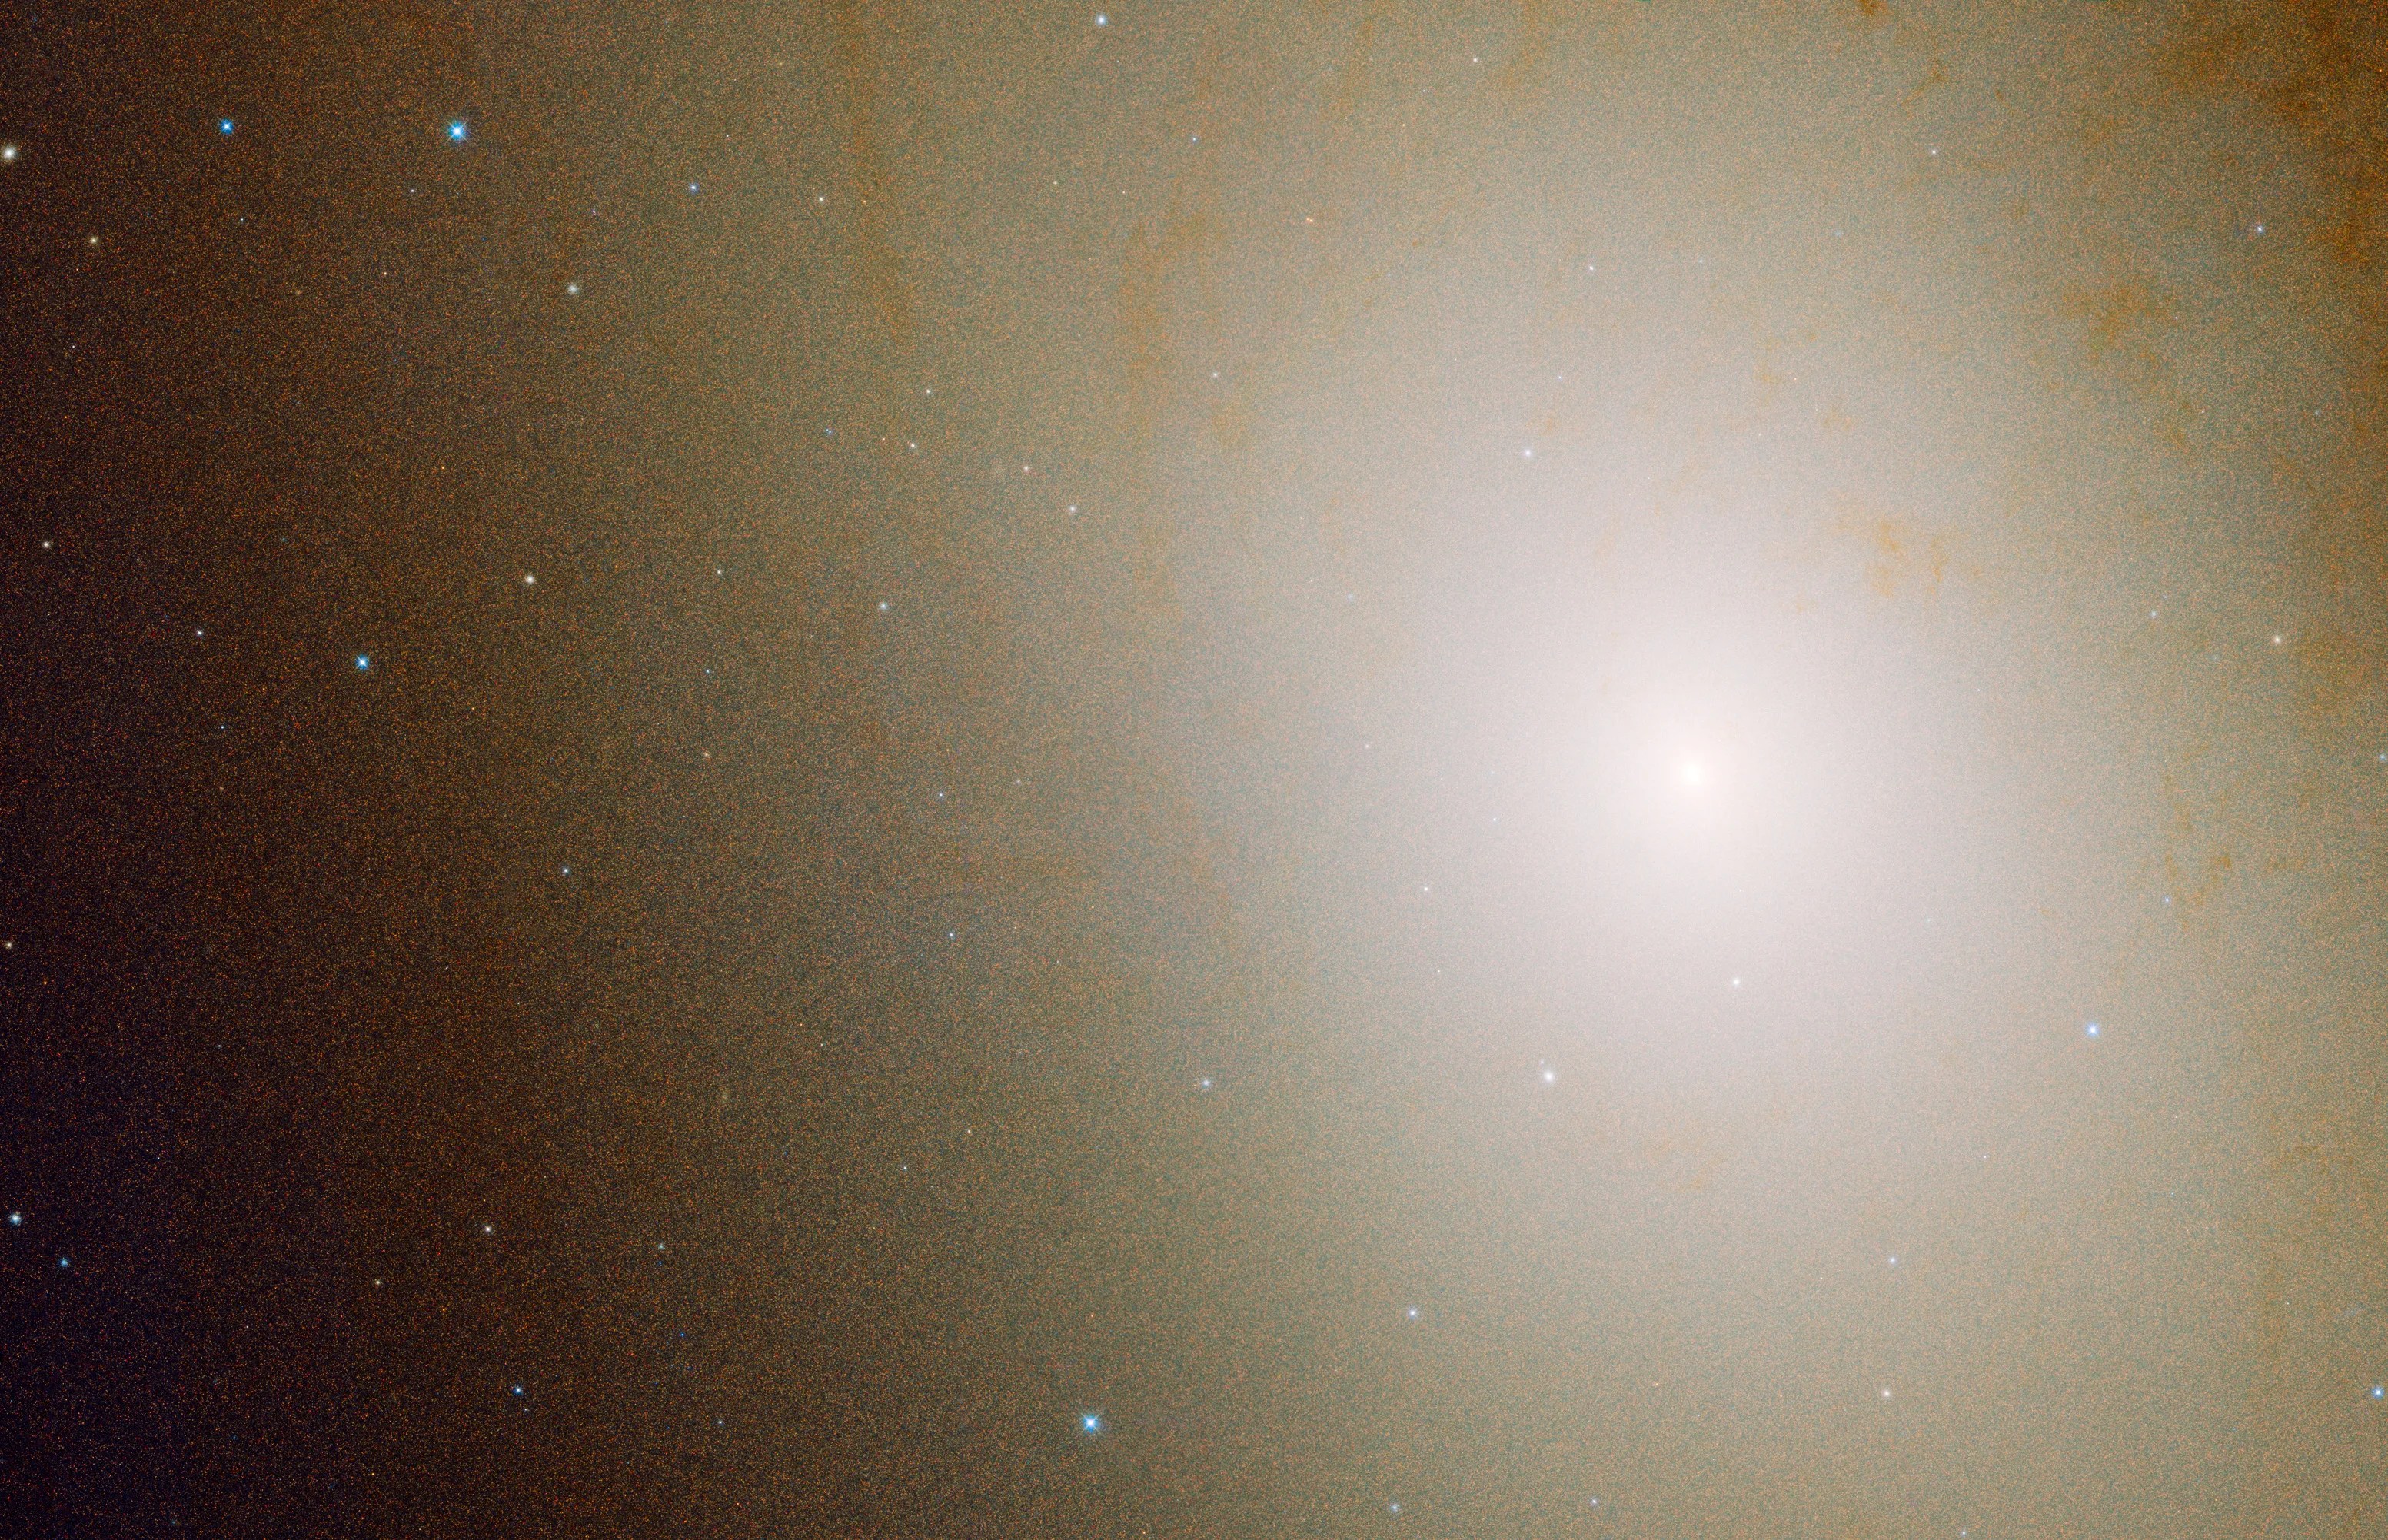 The central core of M31 which is filled with yellowish stars